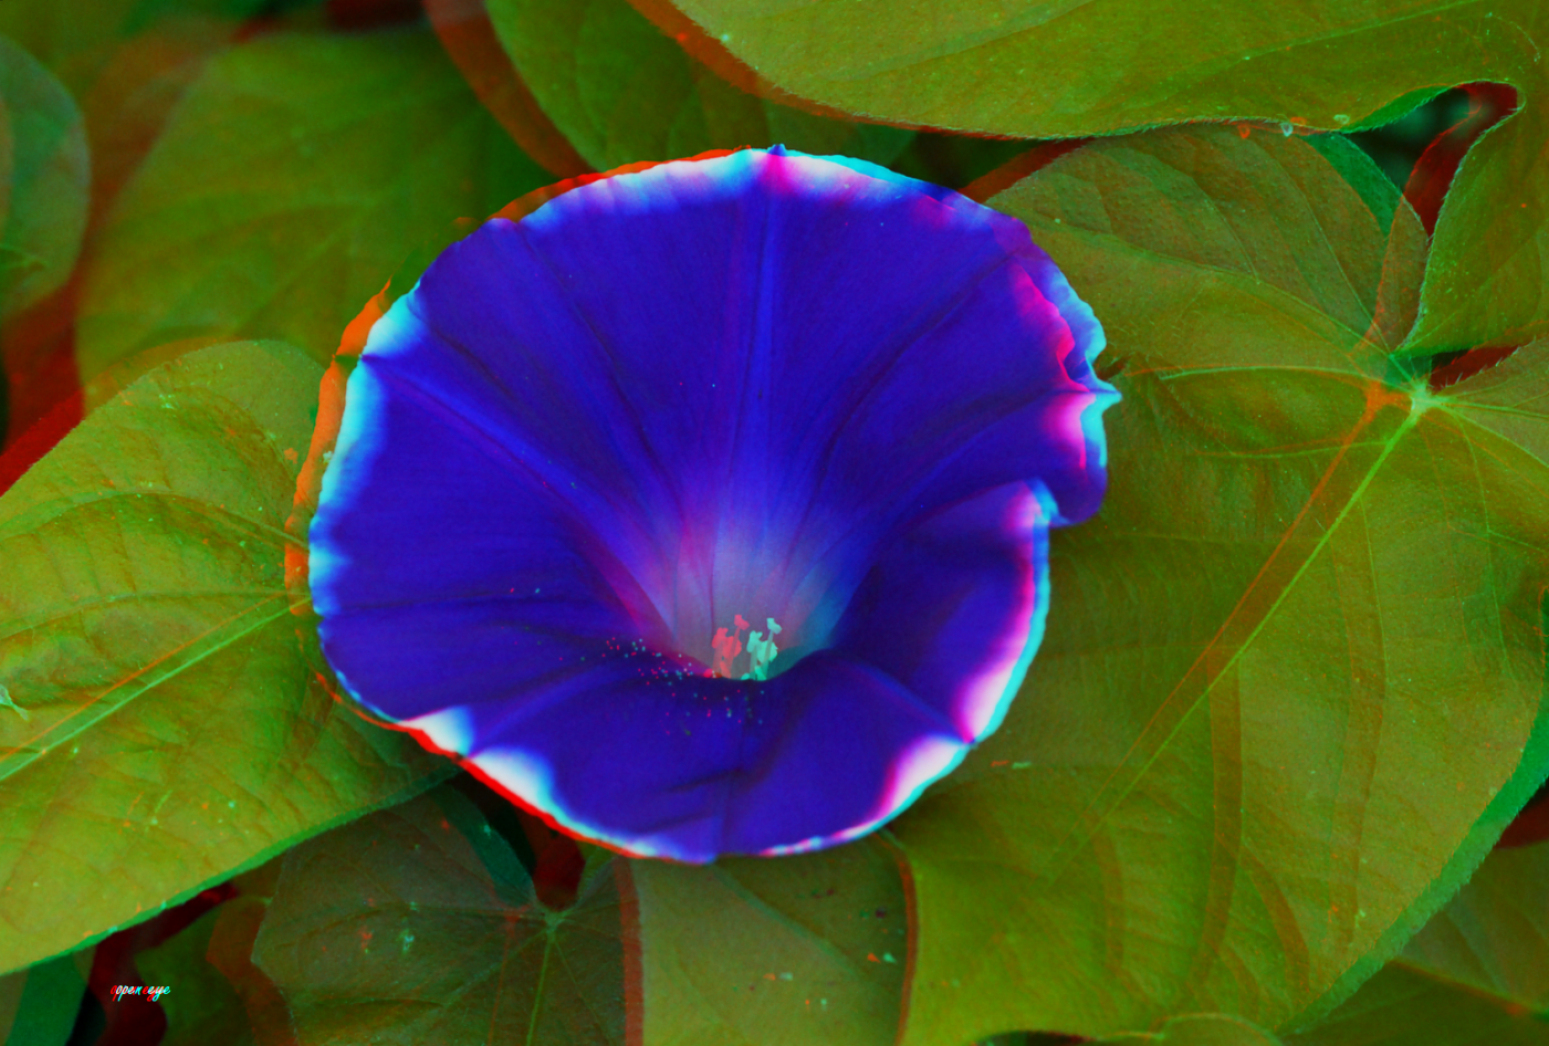  Morning Glory - Anaglyphen